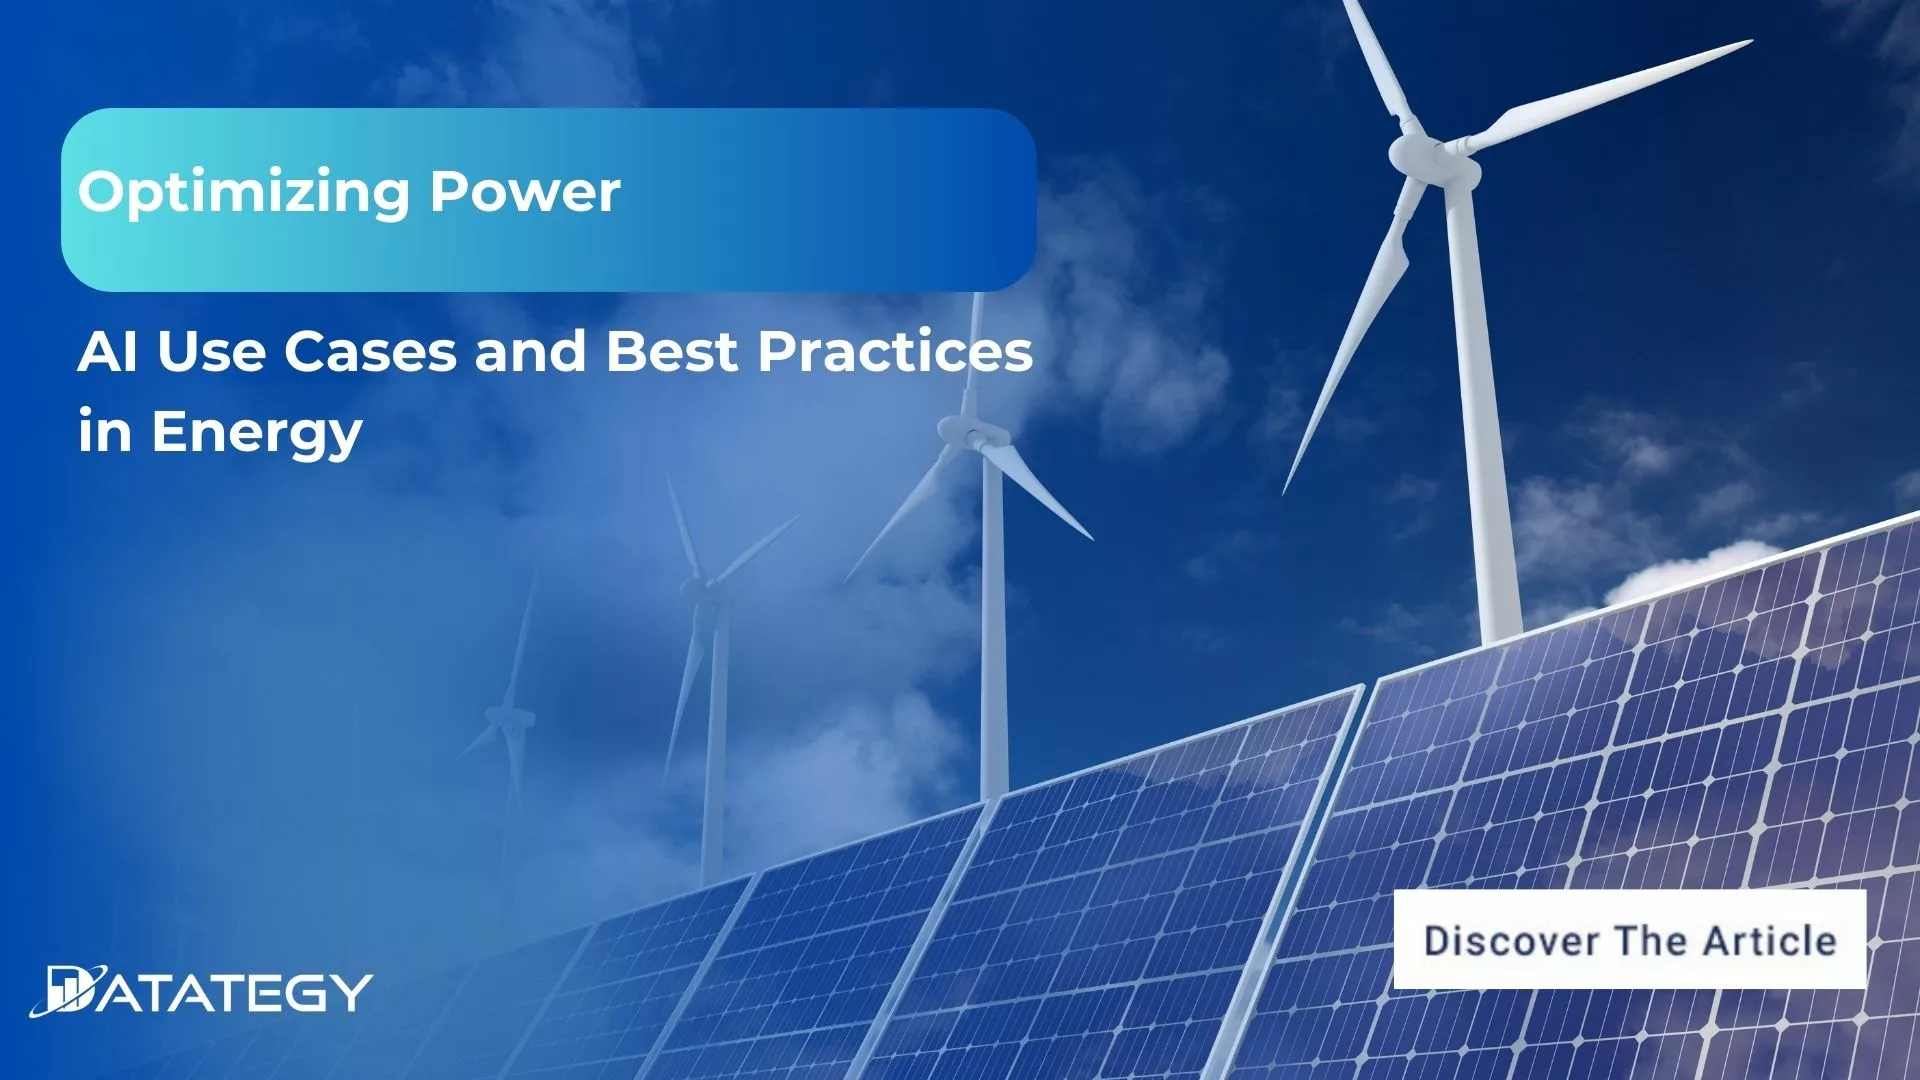 Optimizing Power: AI Use Cases and Best Practices in Energy